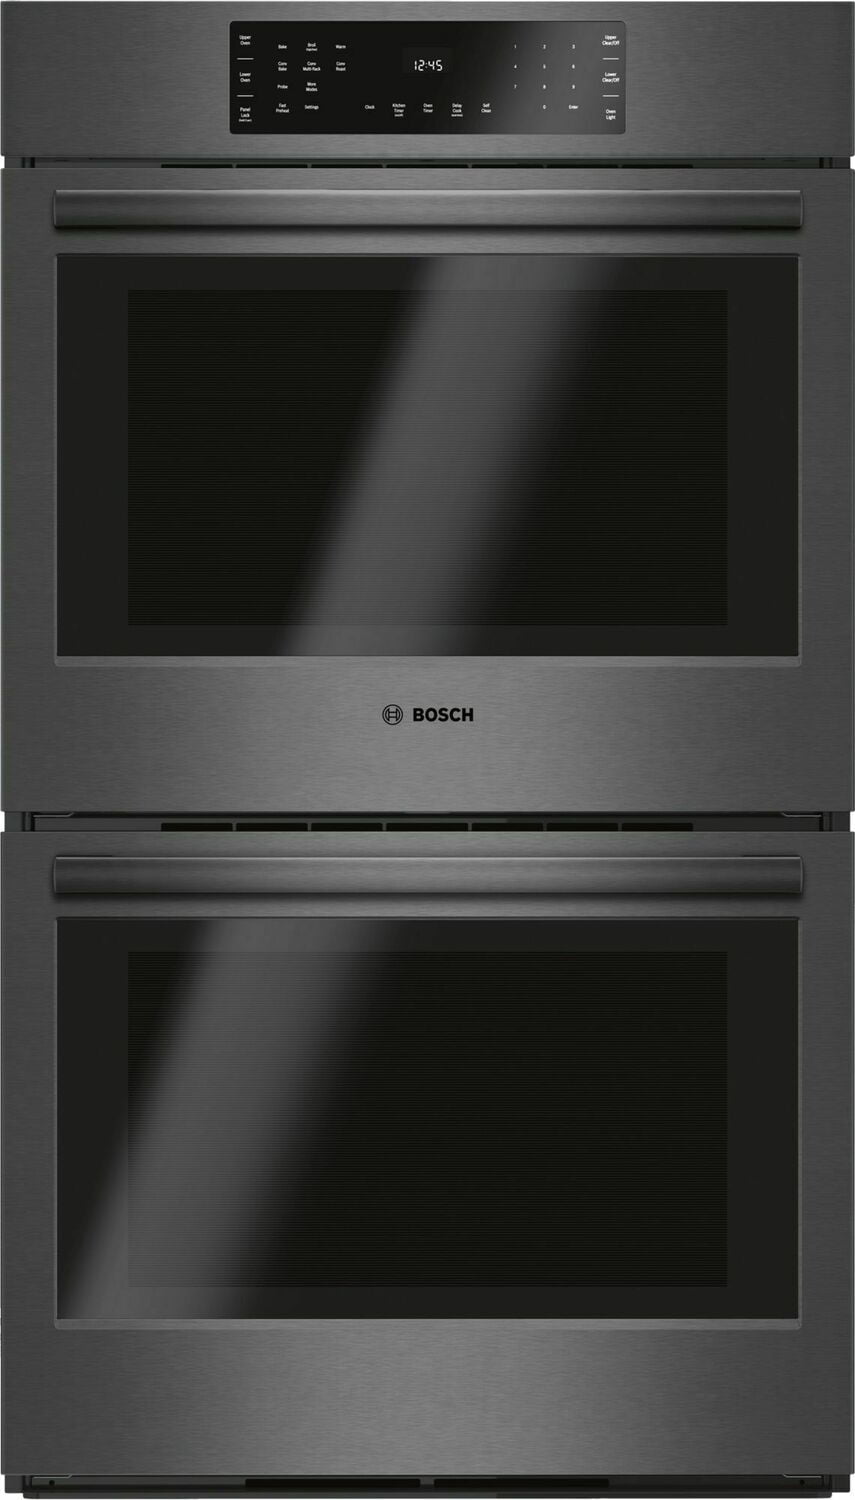 Bosch HBL8642UC 800 Series Double Wall Oven 30'' Black Stainless Steel Hbl8642Uc